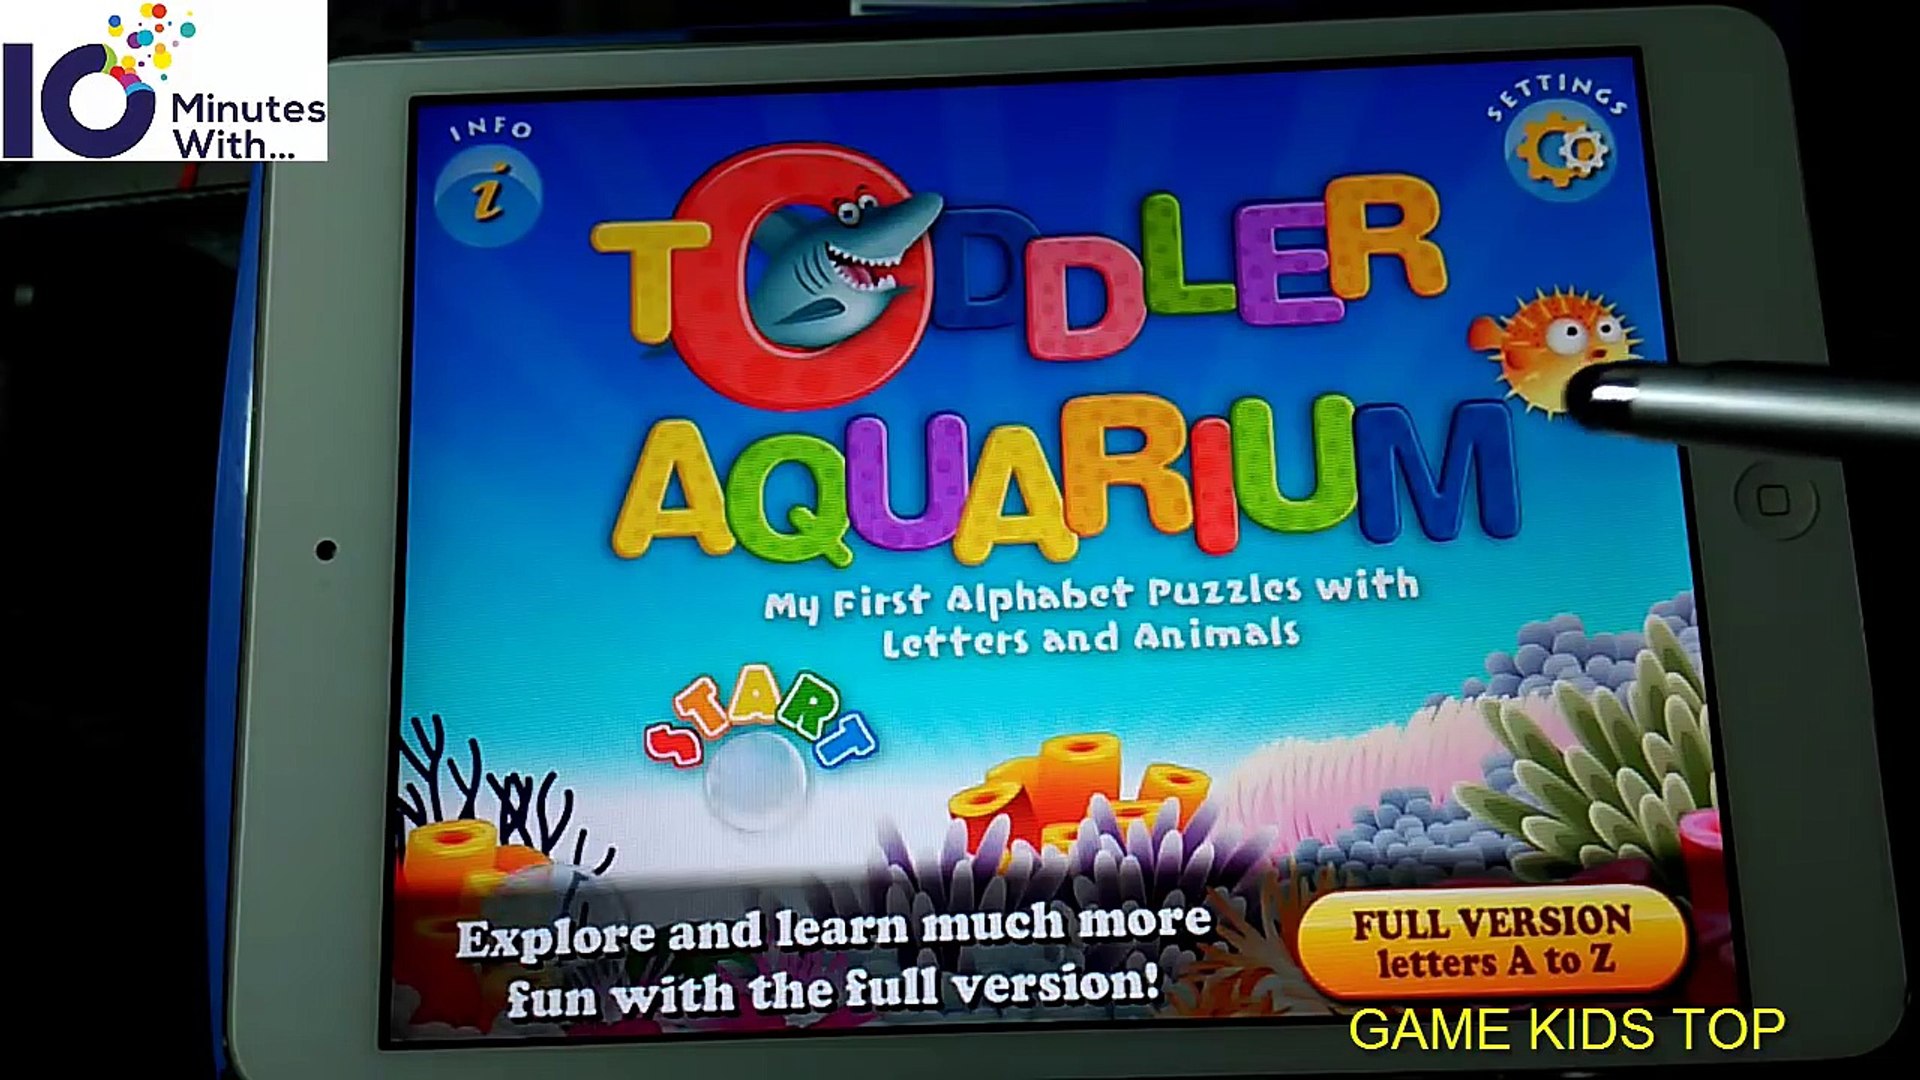 Kids First Alphabet Puzzles   Letters and Animals with Toddler Aquarium education app for Kids